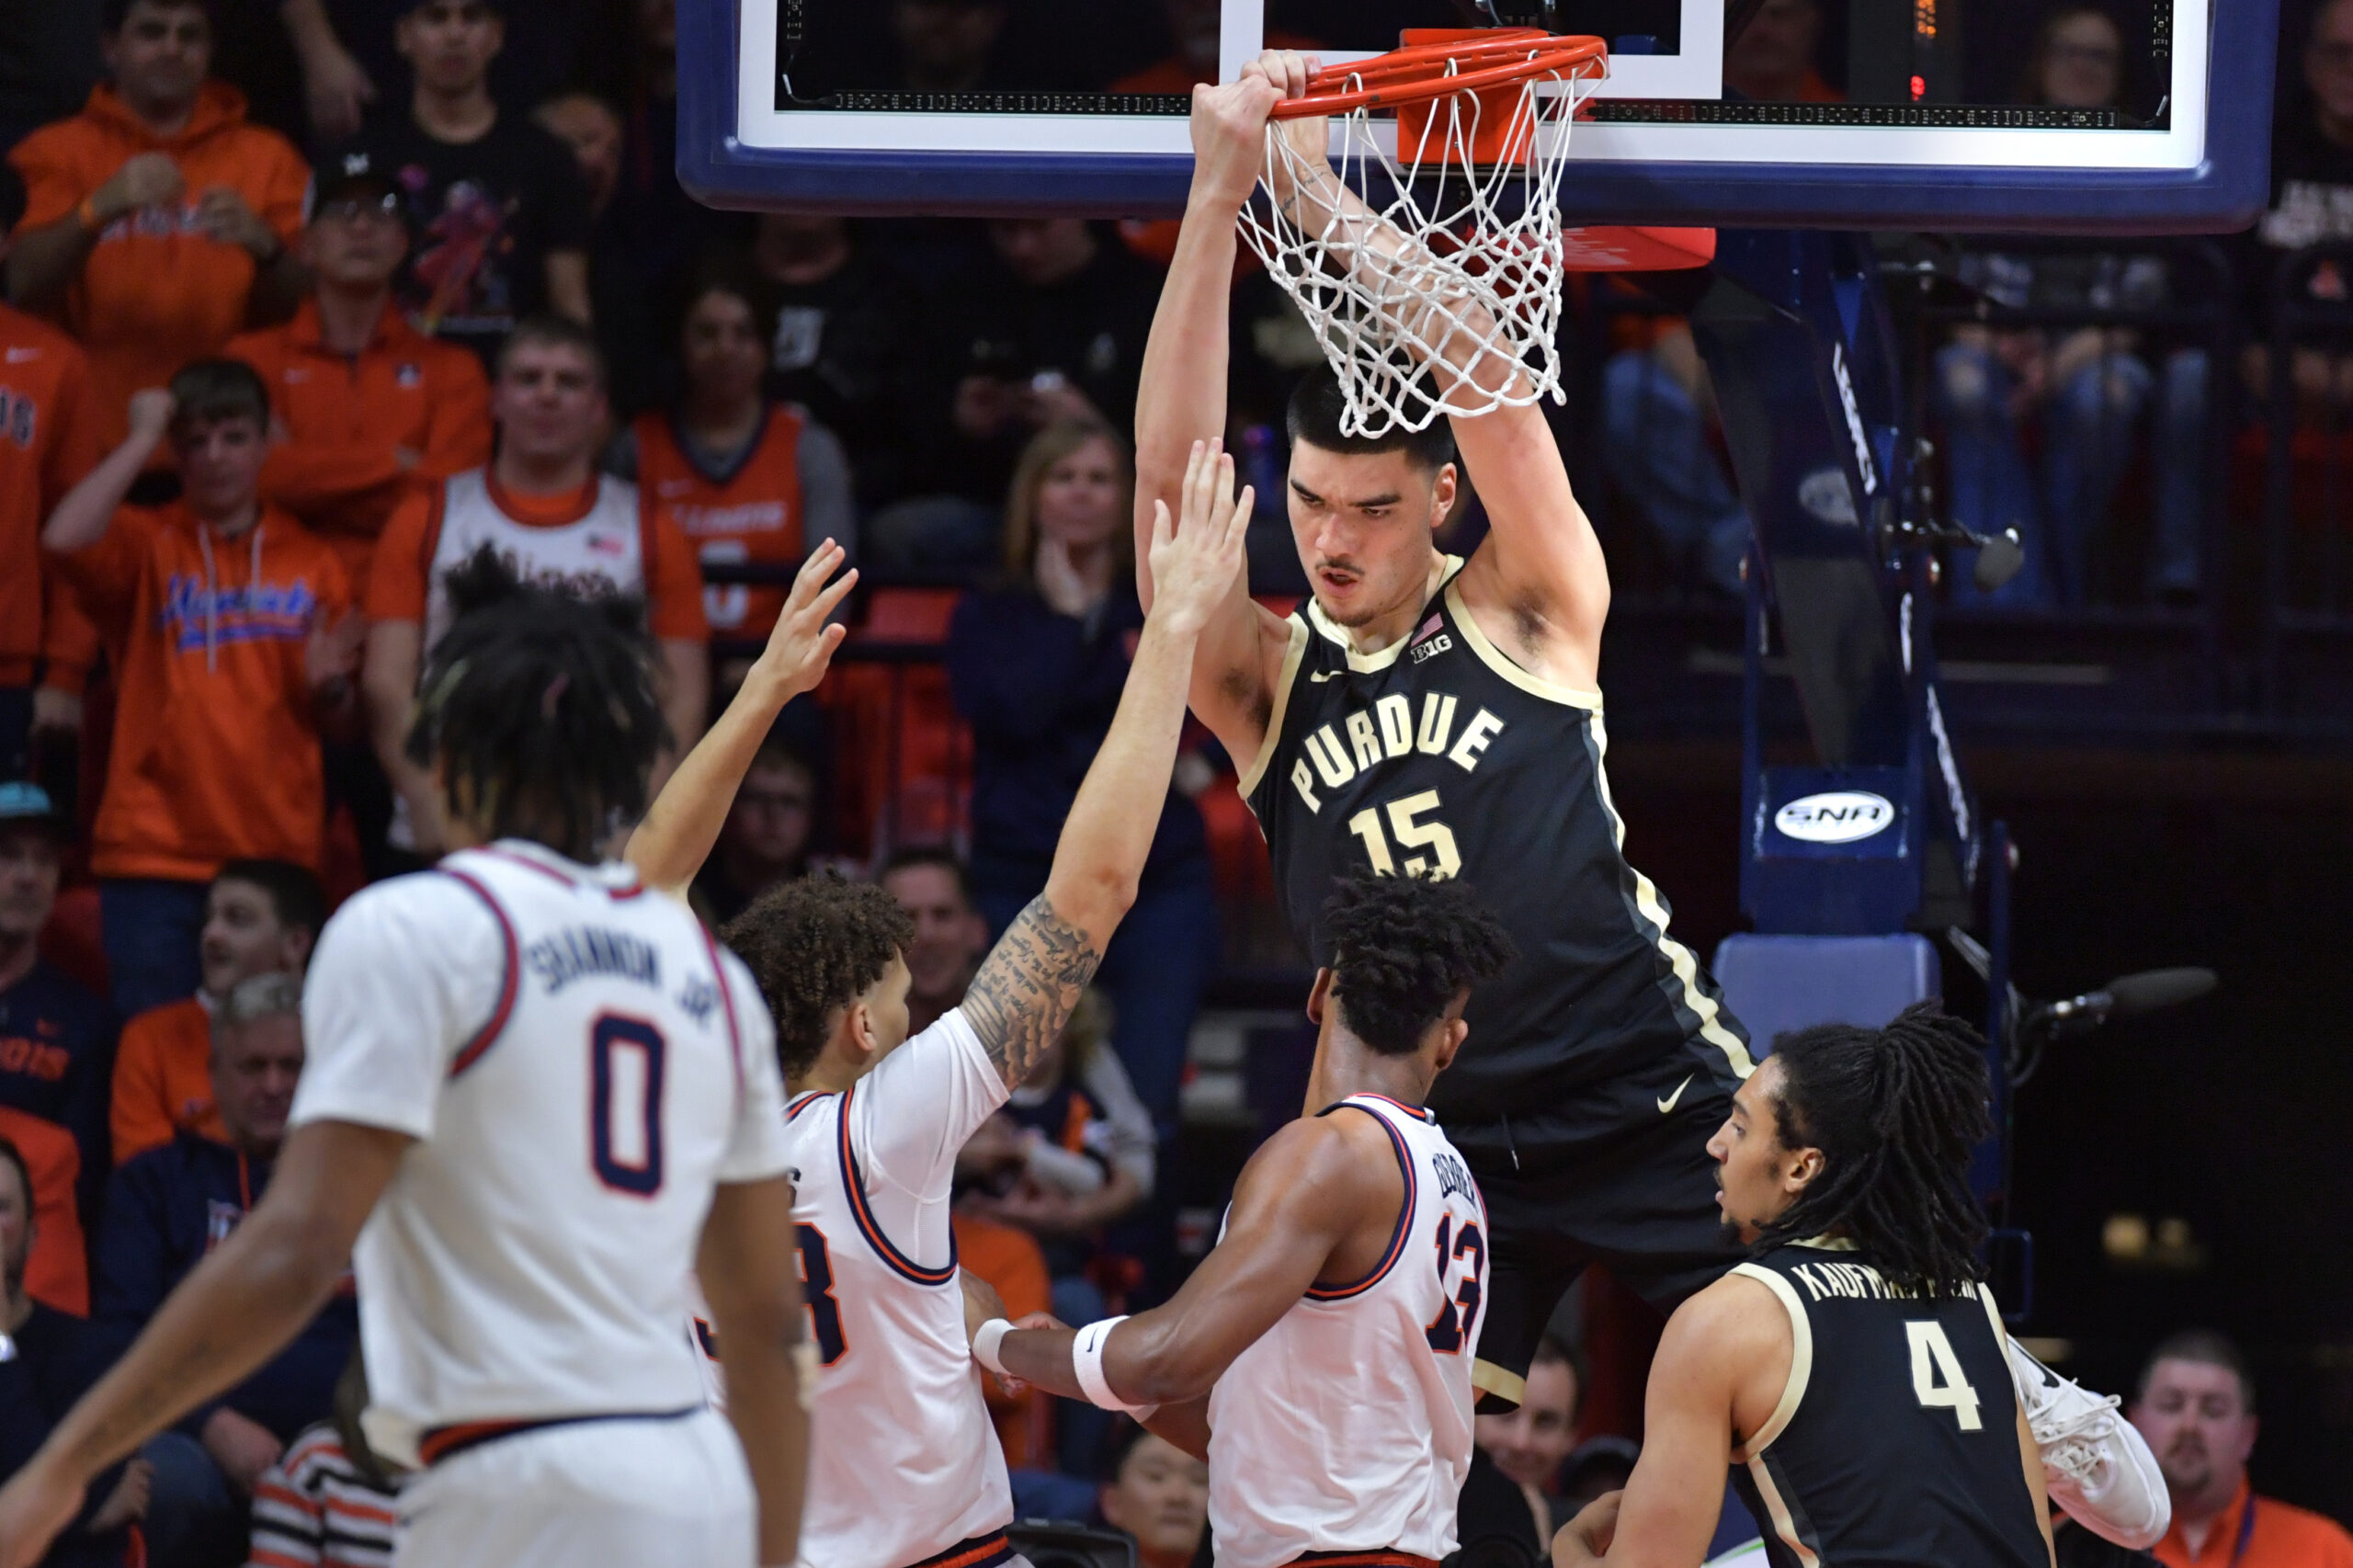 Purdue vs. Utah State Predictions + March Madness Betting Promos Last